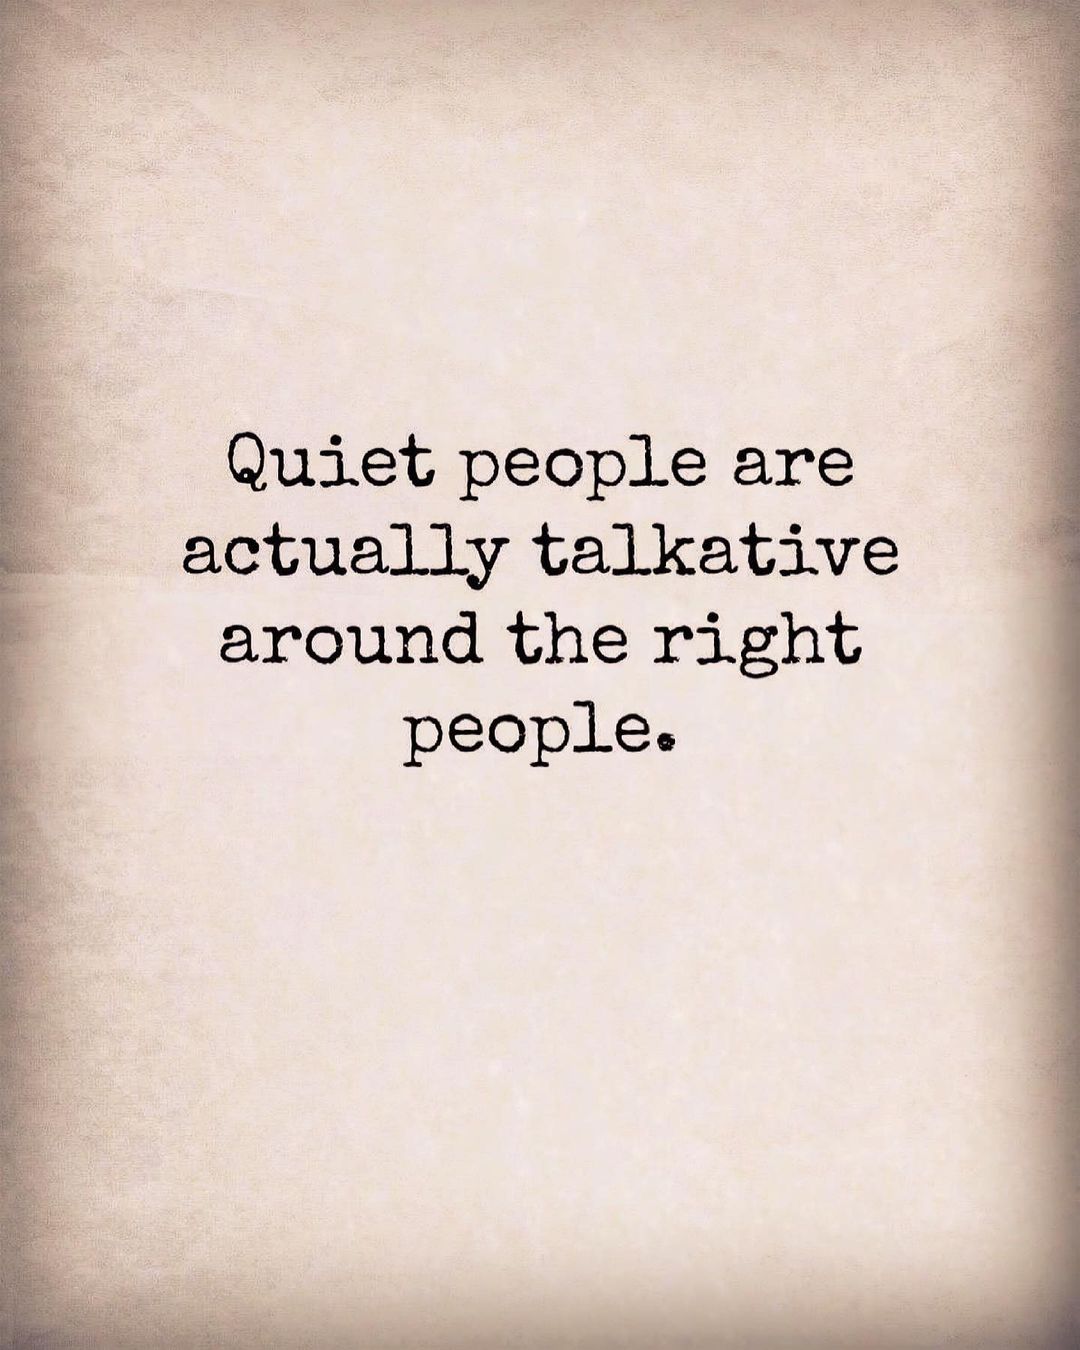 Quiet people are actually talkative around the right people.